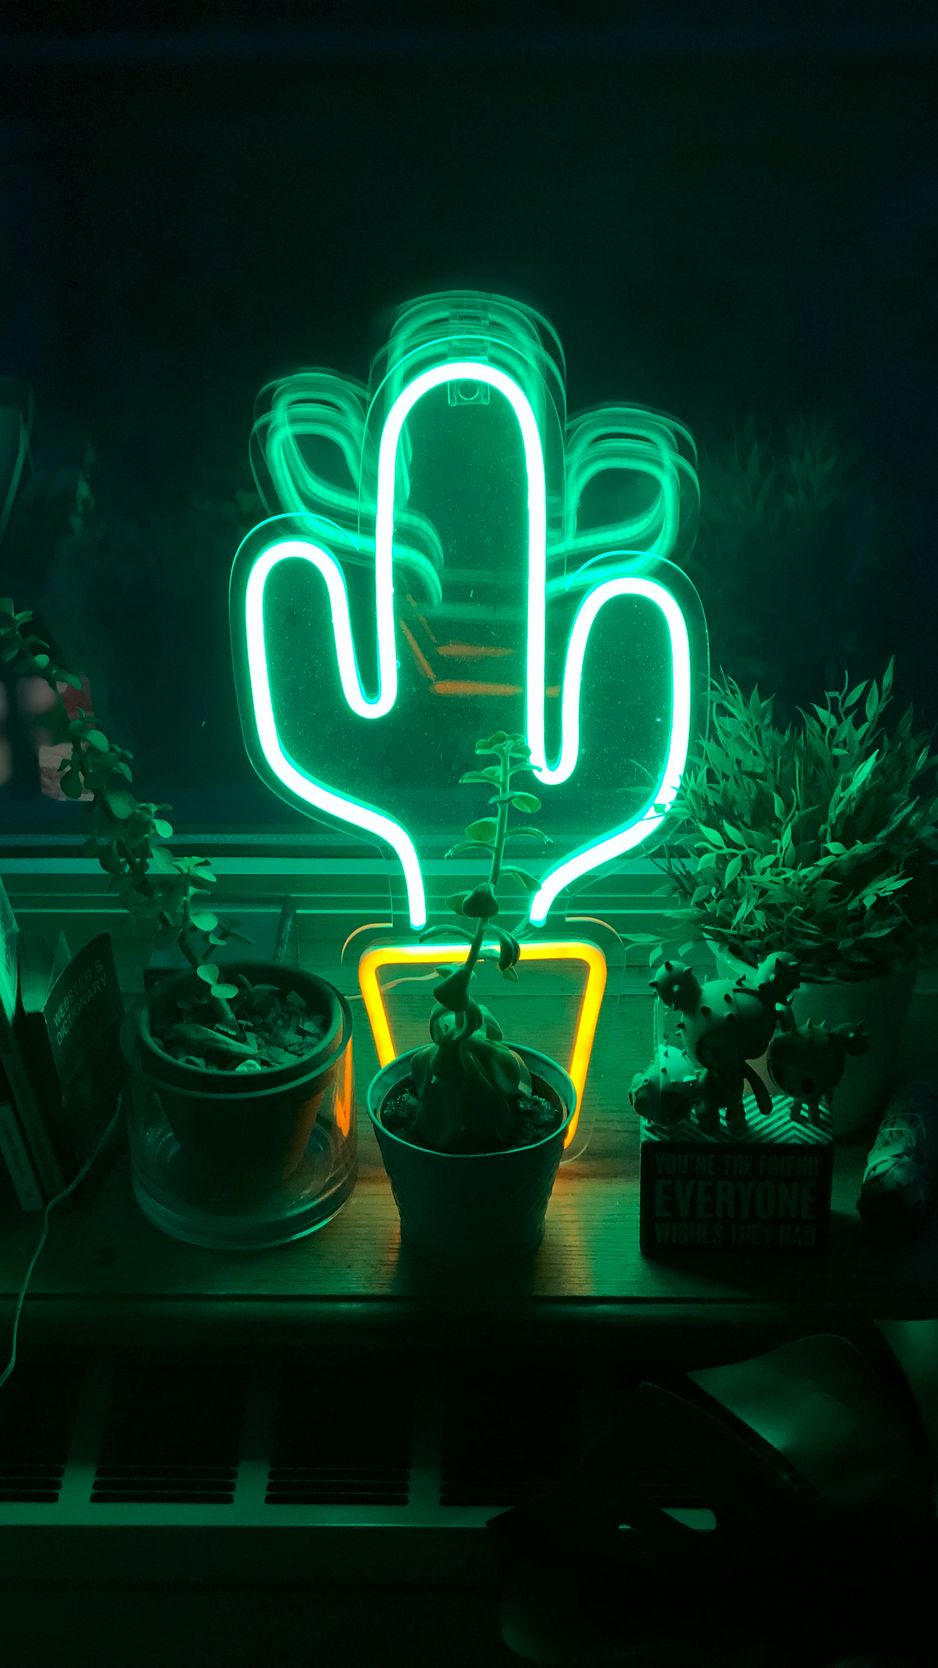 Download wallpaper 938x1668 neon, cactus, flowers, light, green iphone  8/7/6s/6 for parallax hd background